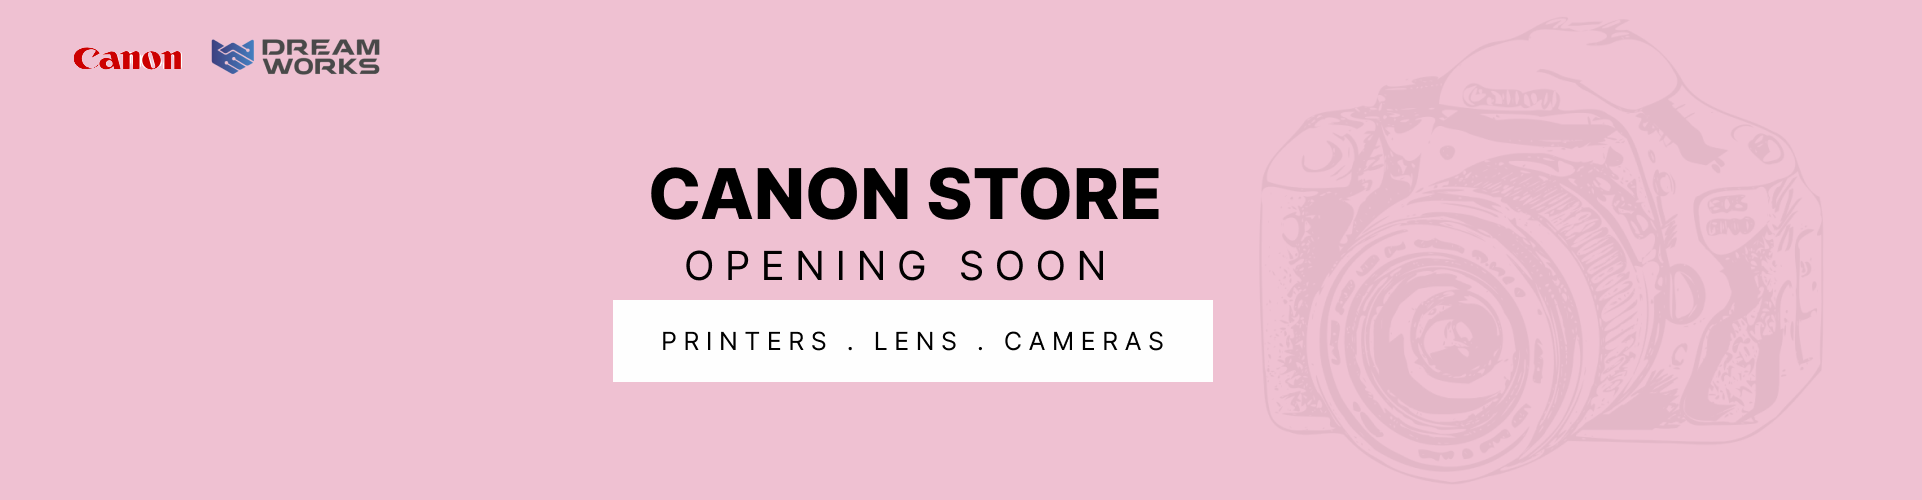 CANON STORE BANNER